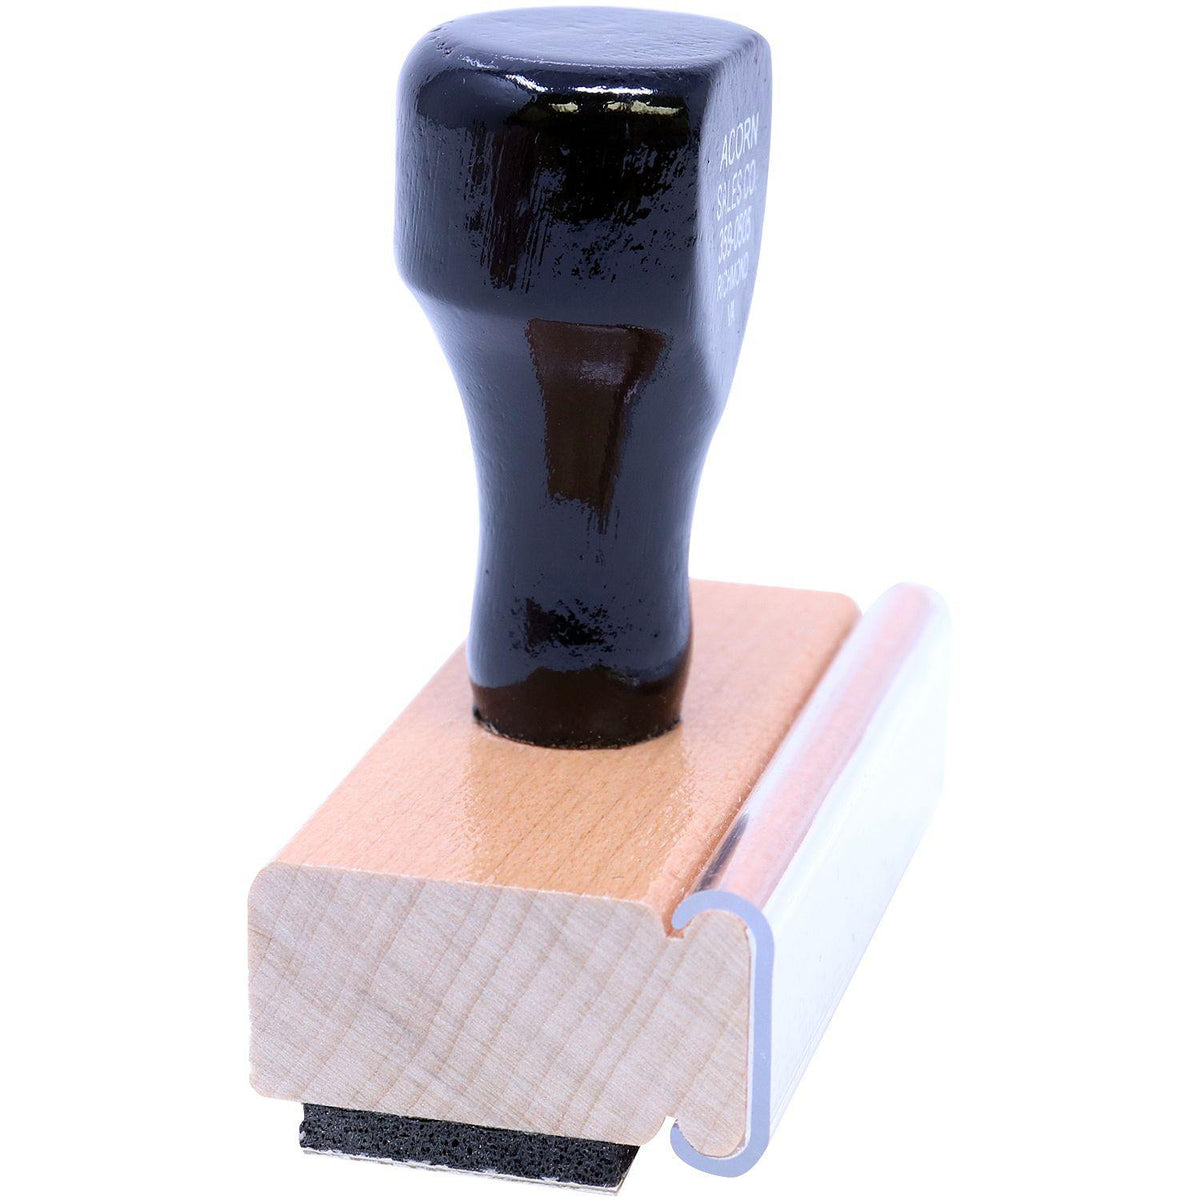 Narrow Font Second Notice Rubber Stamp - Engineer Seal Stamps - Brand_Acorn, Impression Size_Small, Stamp Type_Regular Stamp, Type of Use_Office